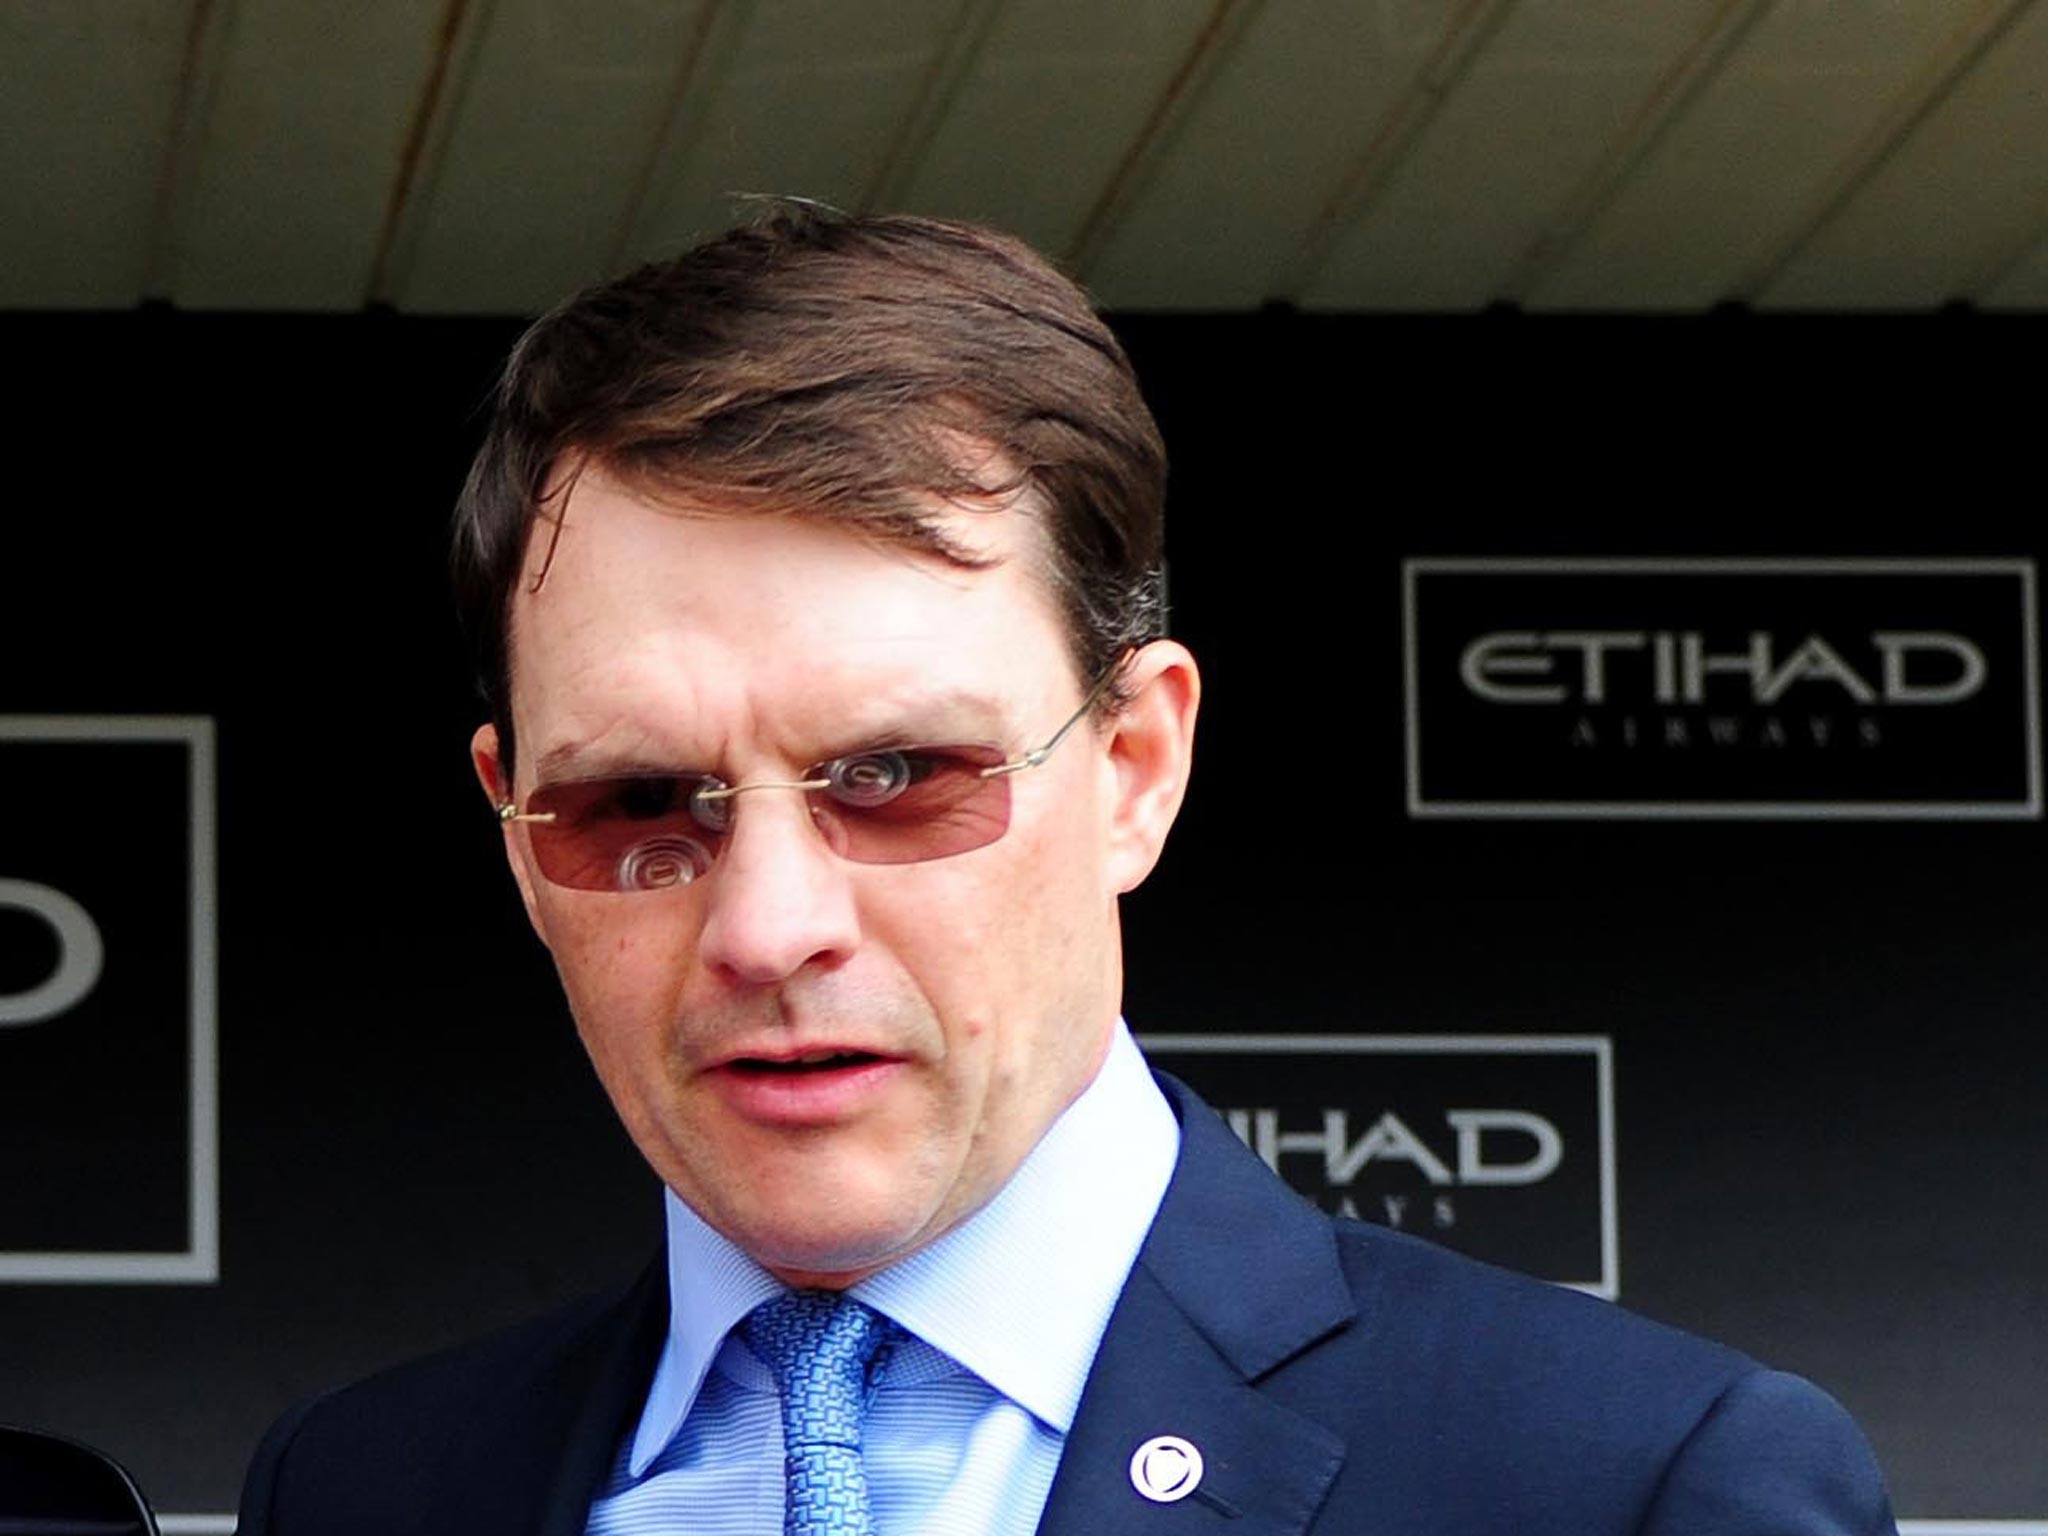 Aidan O’Brien has saddled the last two Derby winners but no one has saddled three in a row